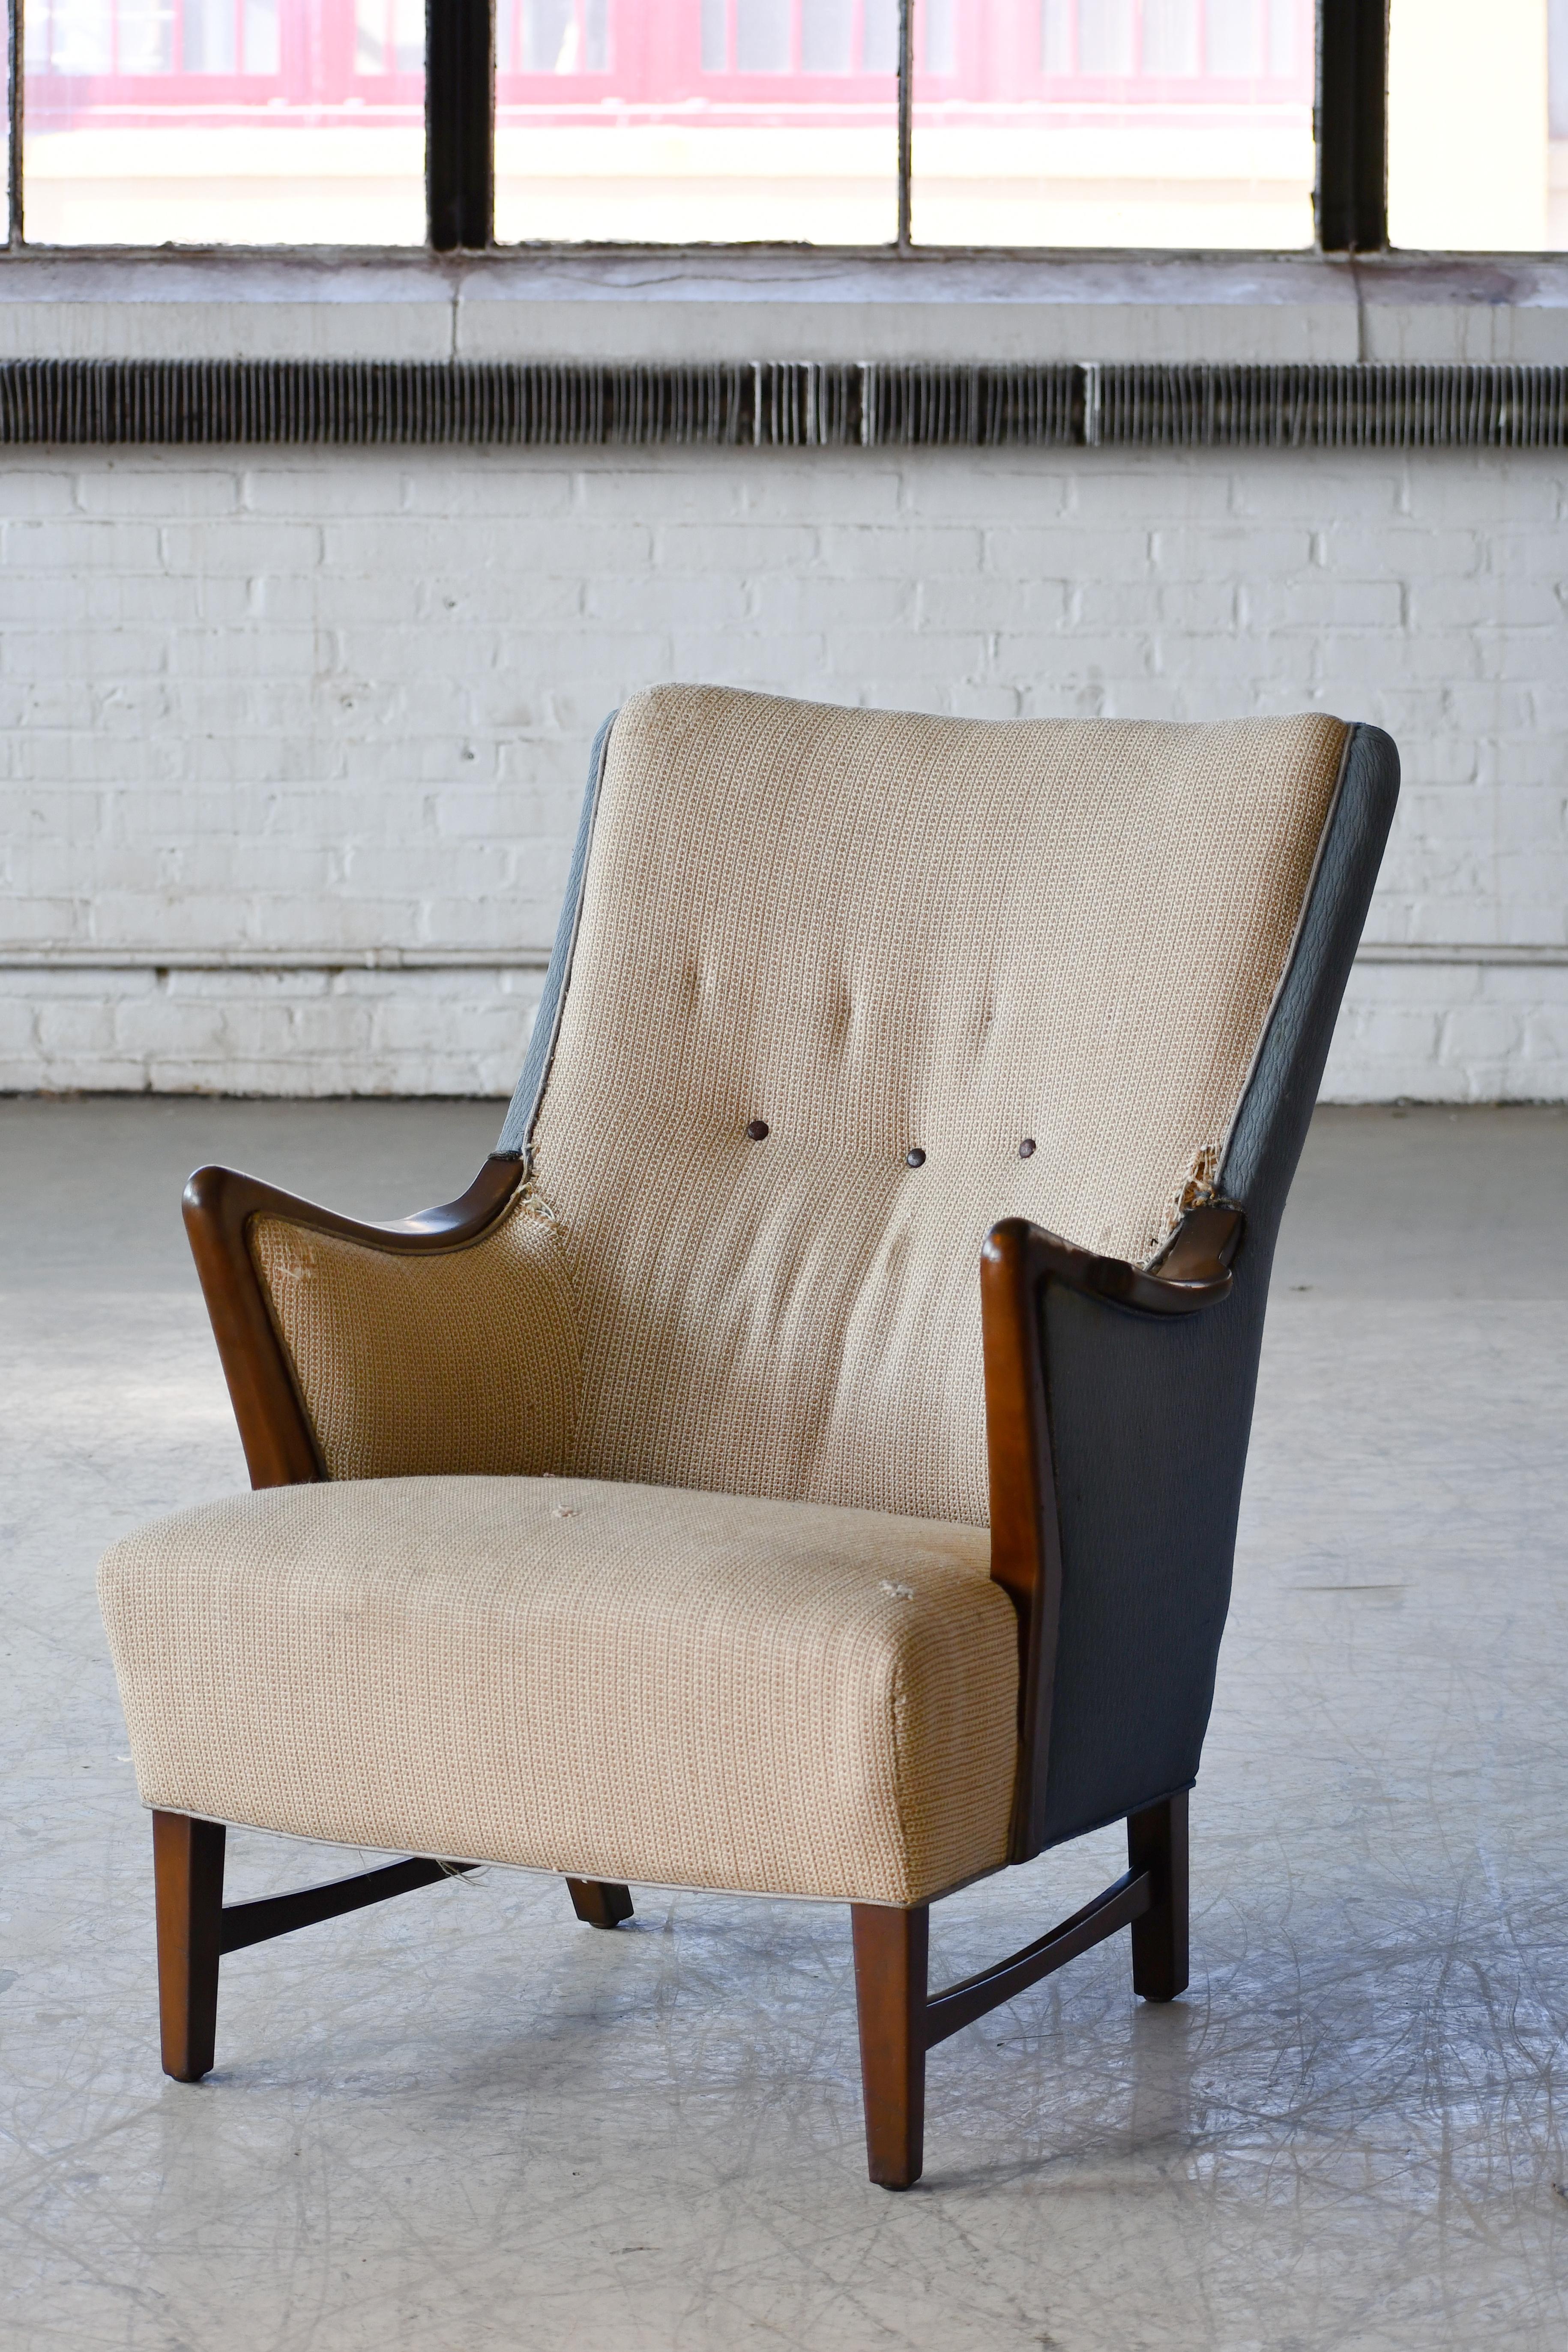 Beautiful Danish lounge chair made in the tradition of Scandinavian makers such as Hjalmar Jackson and Carl Malmsten with wooden armrests and legs with stretcher bars made from Maple adding a lot of elegance and flair. Coil springs in seat and